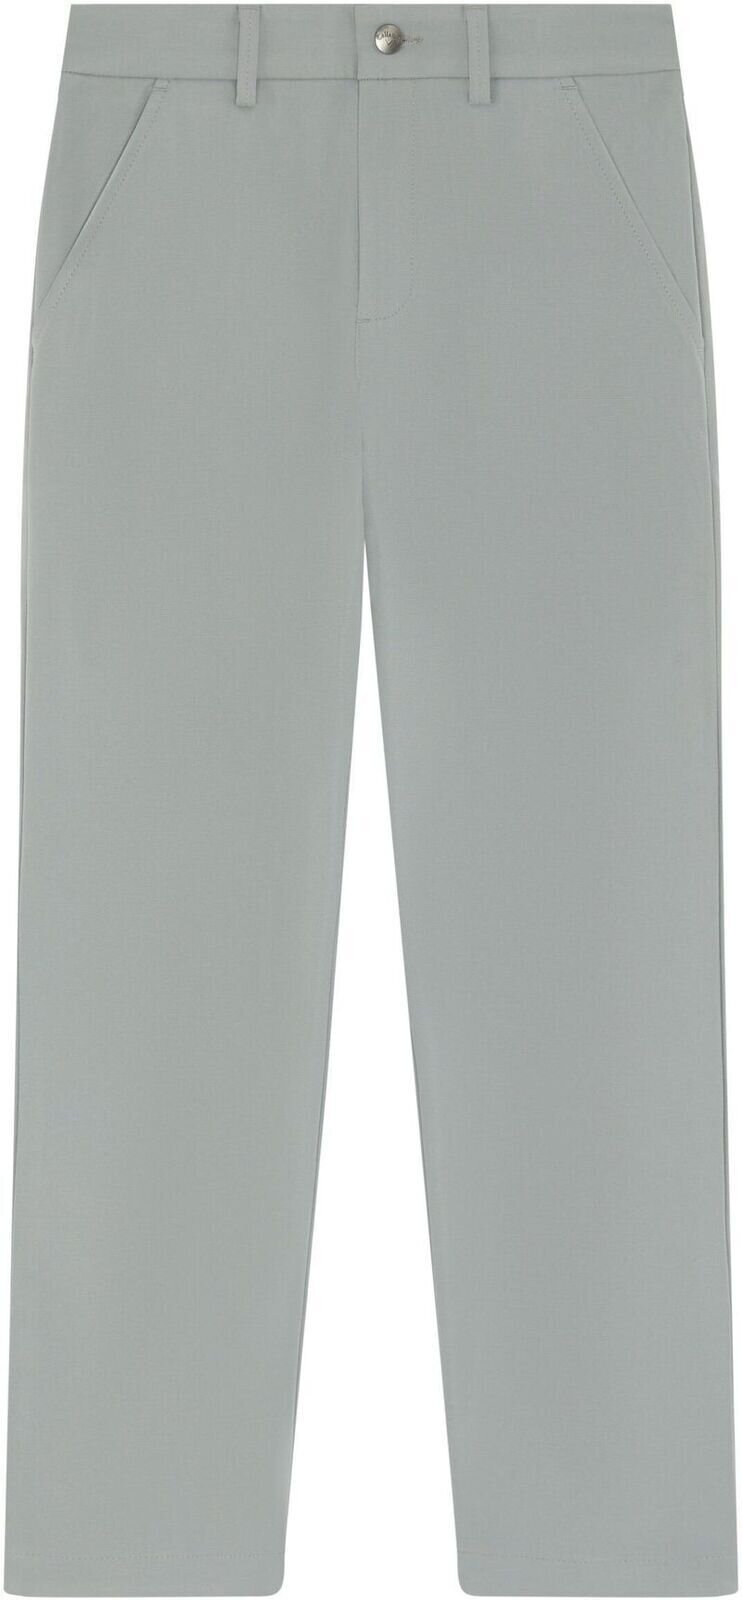 Callaway Boys Solid Prospin Pant Sleet L